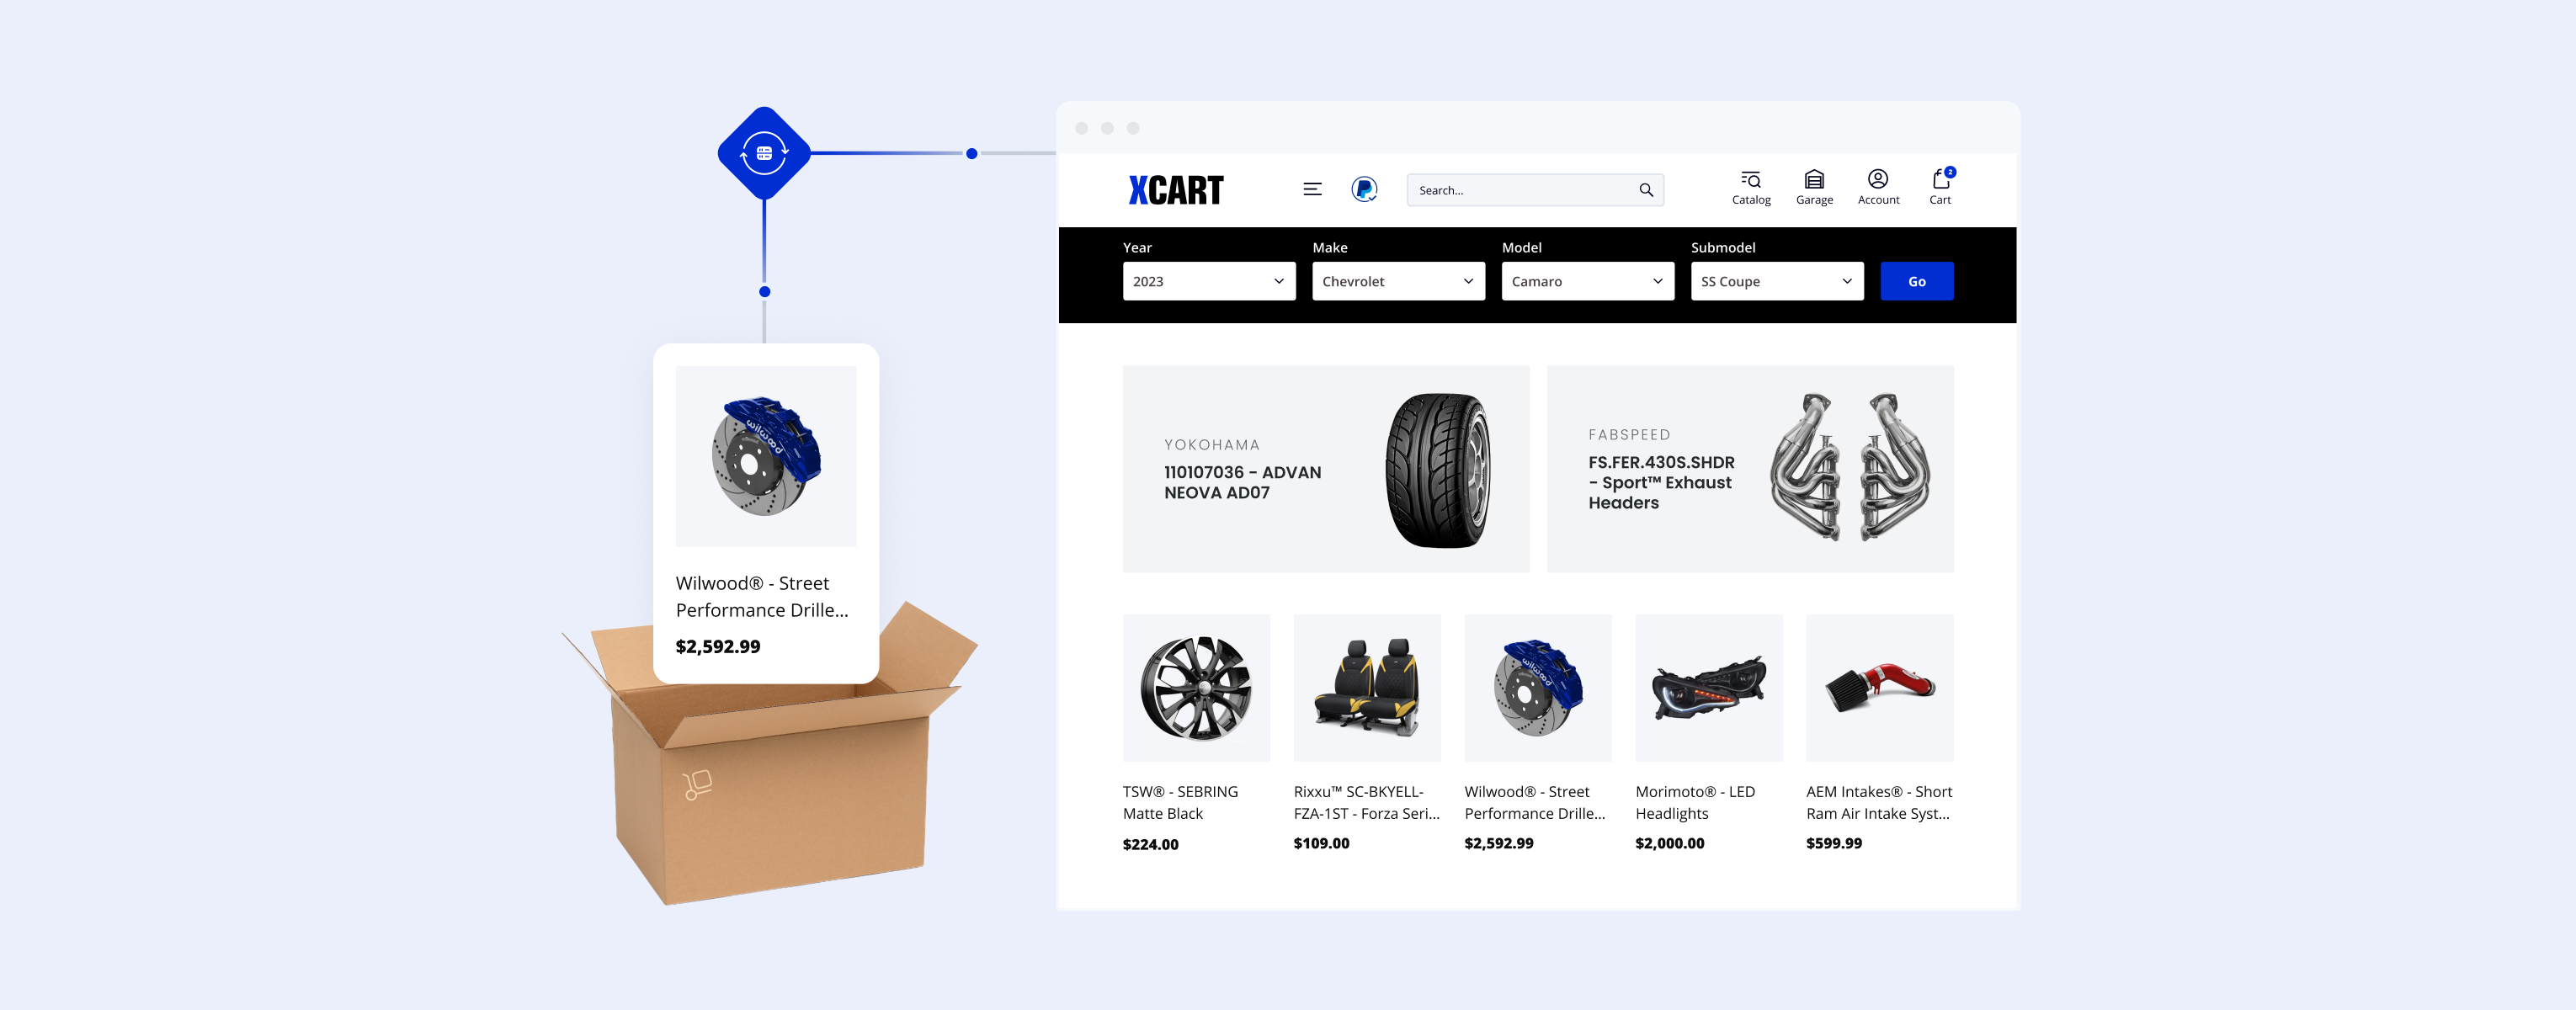 9 Auto Parts Distributors for Online Dropshipping Businesses